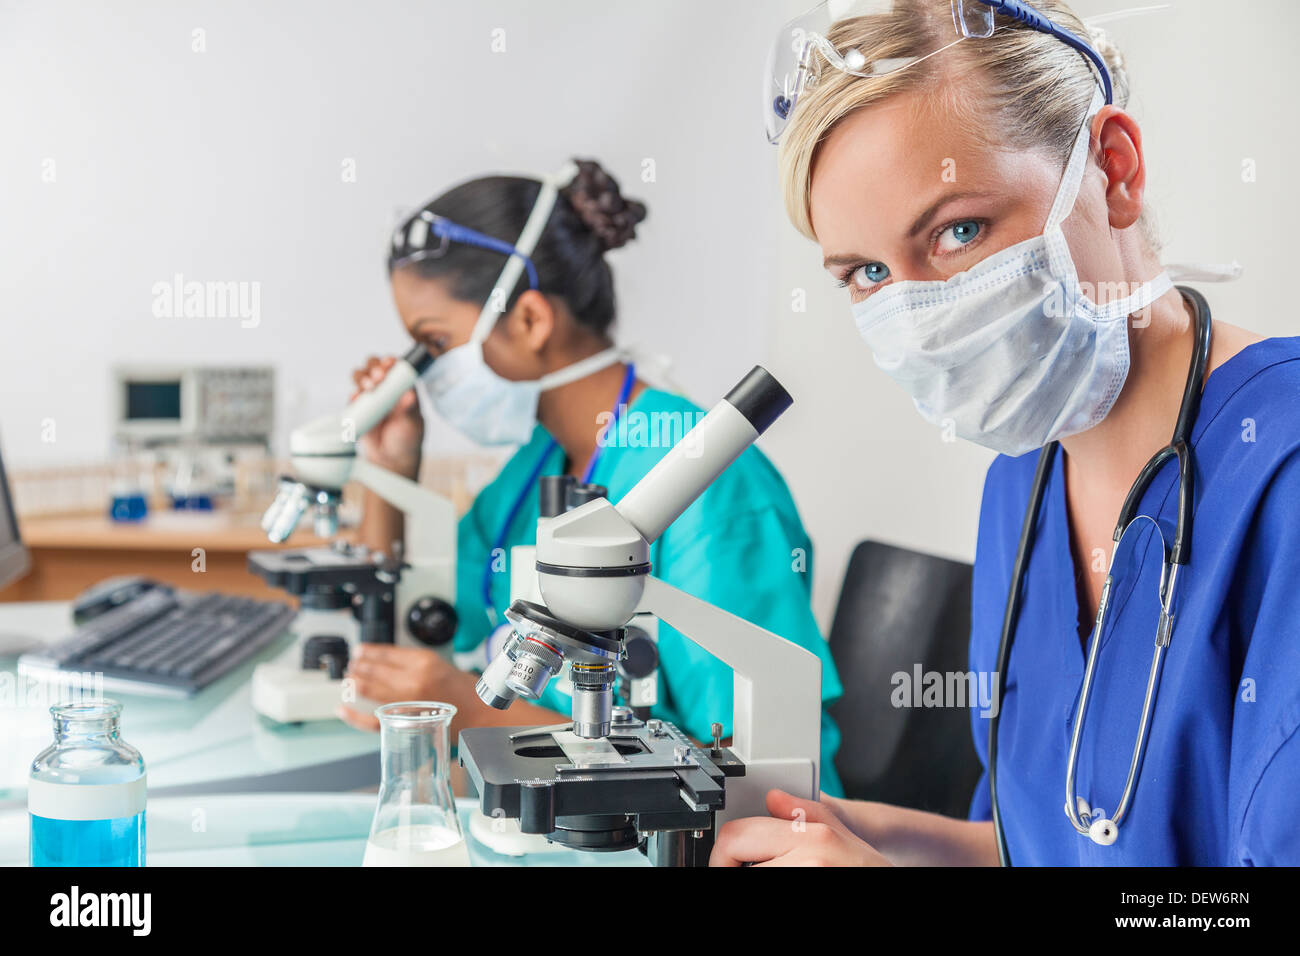 Blond female medical scientific researcher or doctor using microscope in laboratory with an Indian Asian colleague beside her Stock Photo